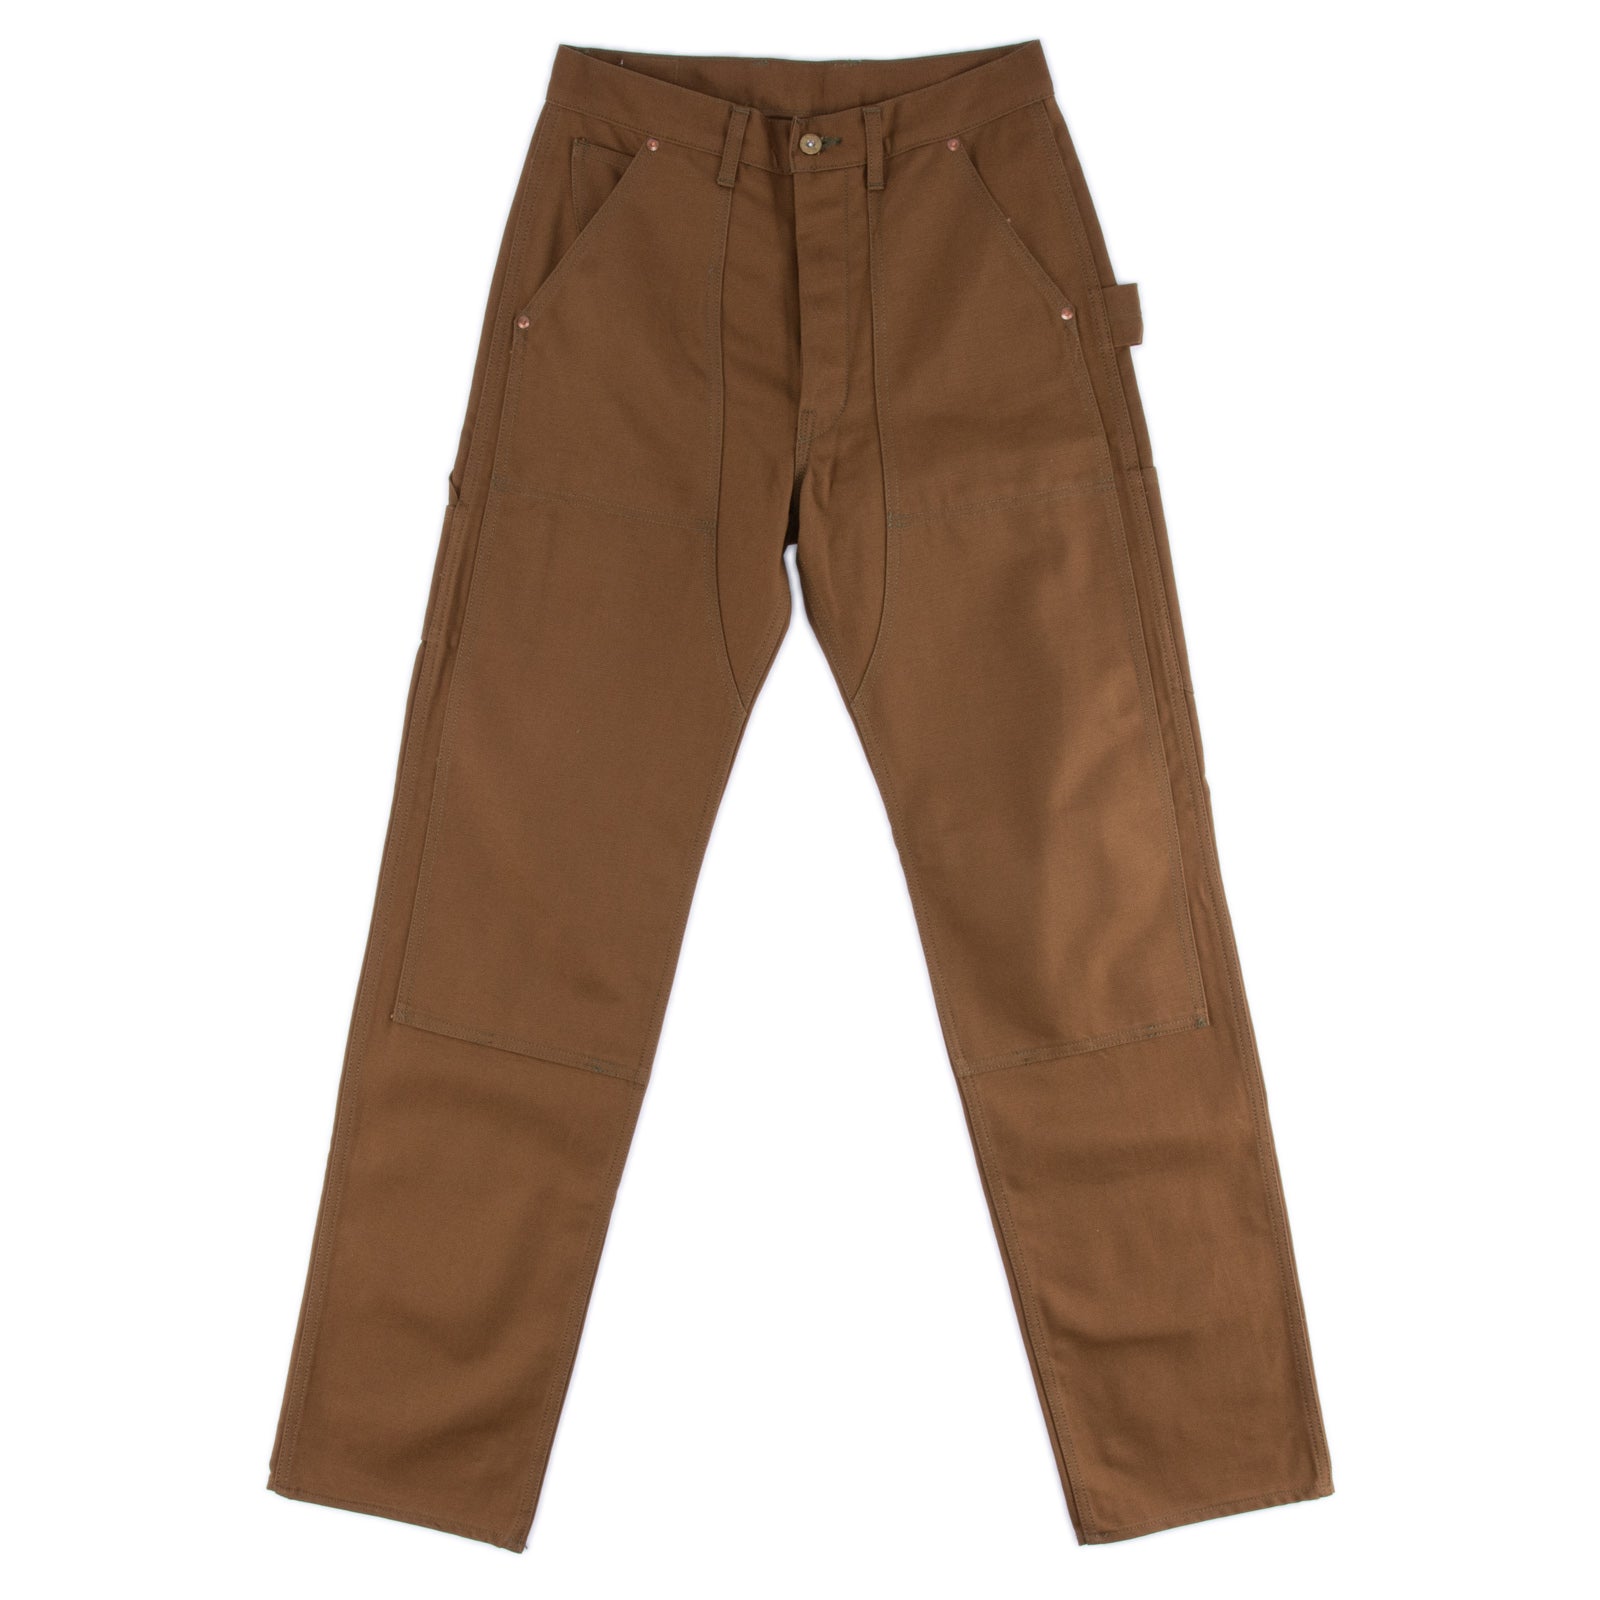 The Real McCoy's 8 Hour Union Brown Canvas Double Knee Trouser ...